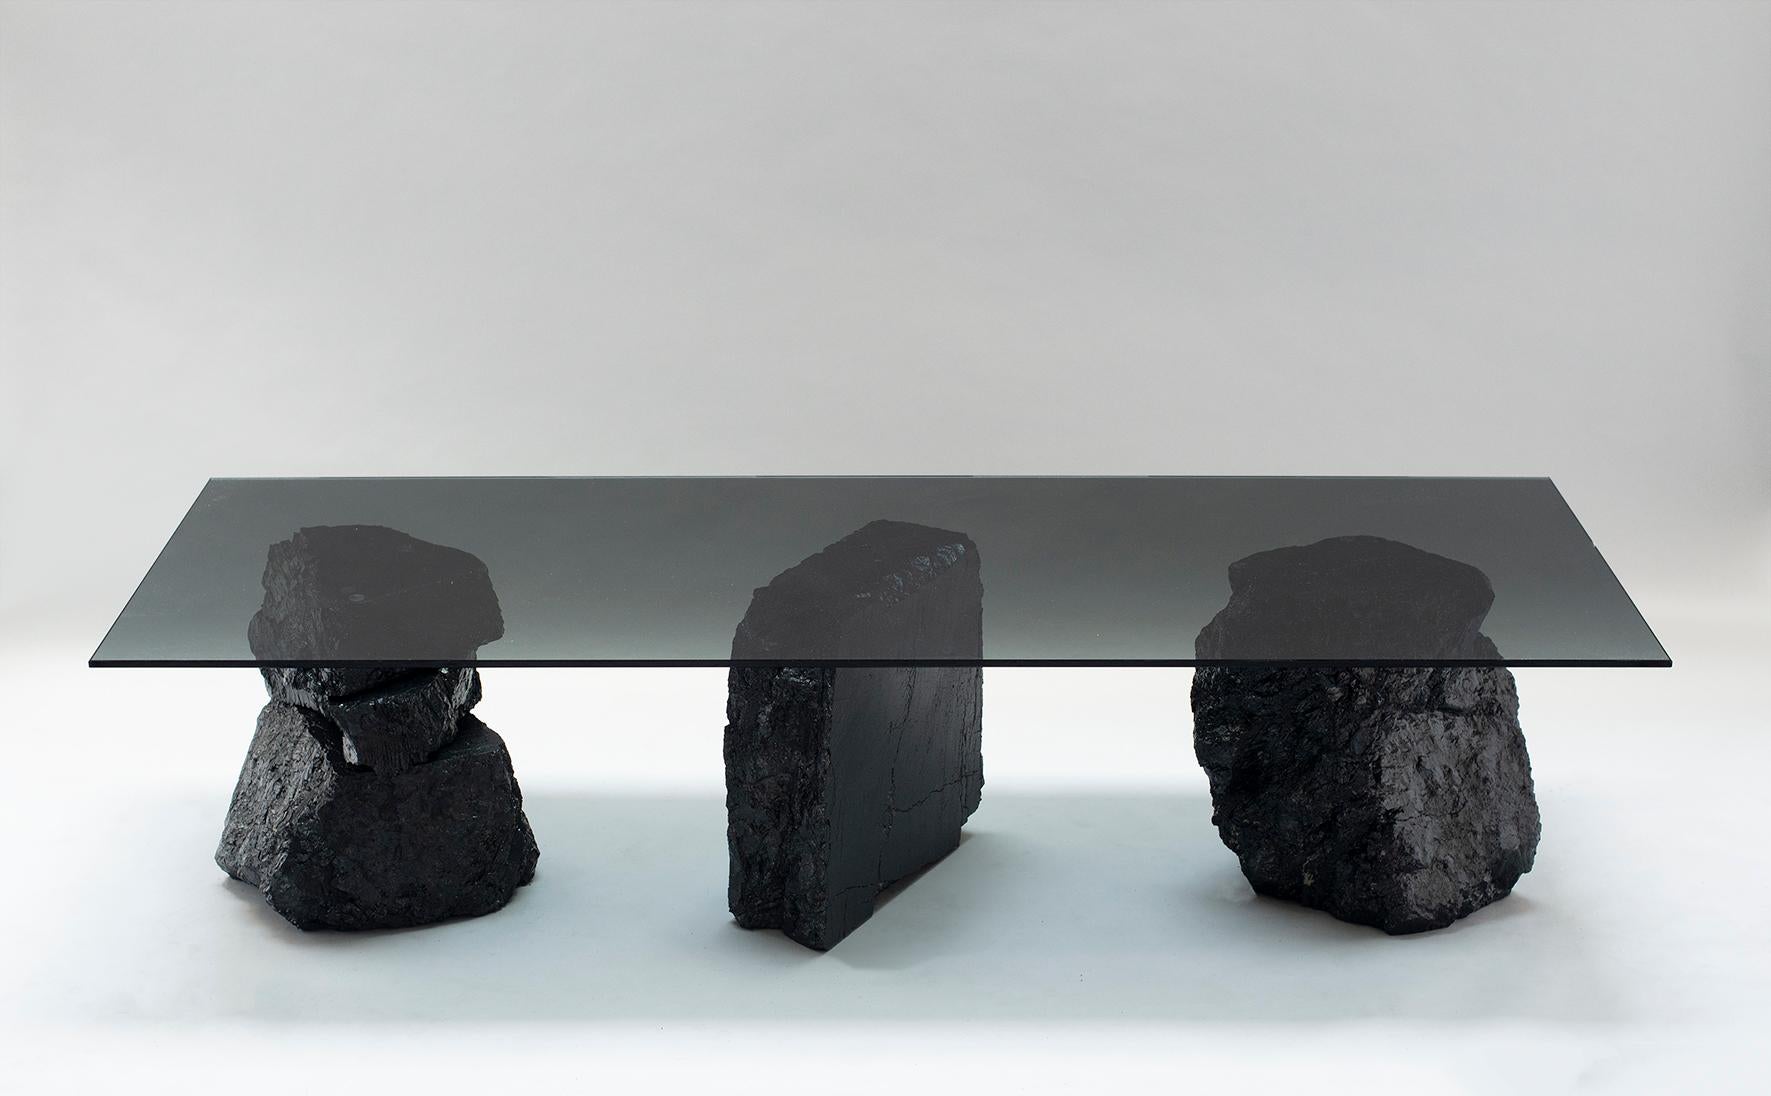 Low table 019 by Jesper Eriksson
Dimensions: D180 x W60 x H45 cm 
Materials: Anthracite Coal, tempered Glass
Weight: 105 kg

Jesper Eriksson (b.1990, Paris) is an artist & designer based in London, interested in work related to the human,